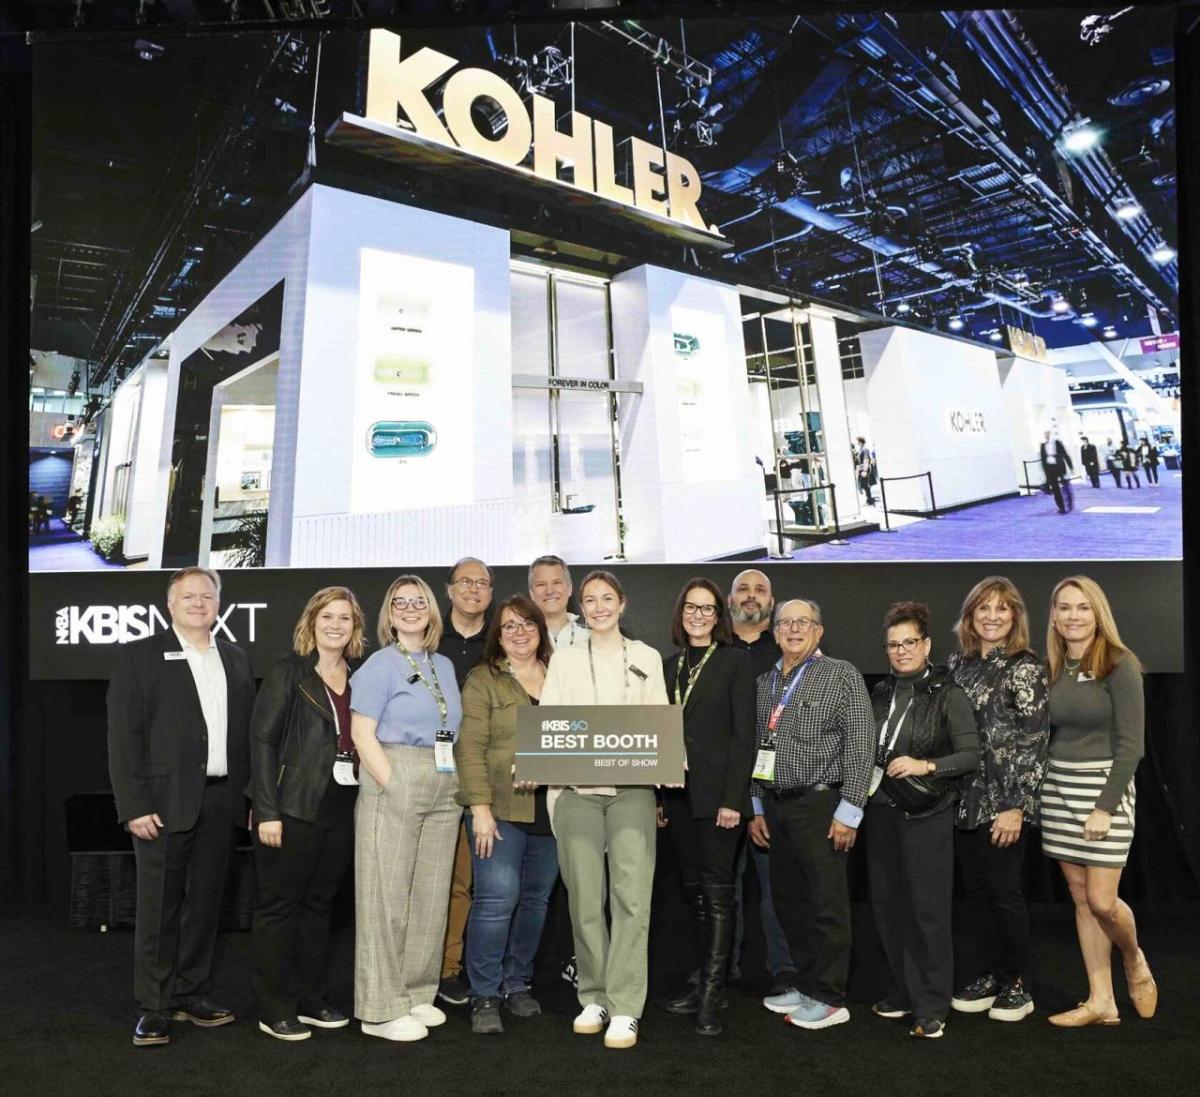 A team of people standing posed in front of the Kohler booth. One holds a sign "Best booth"